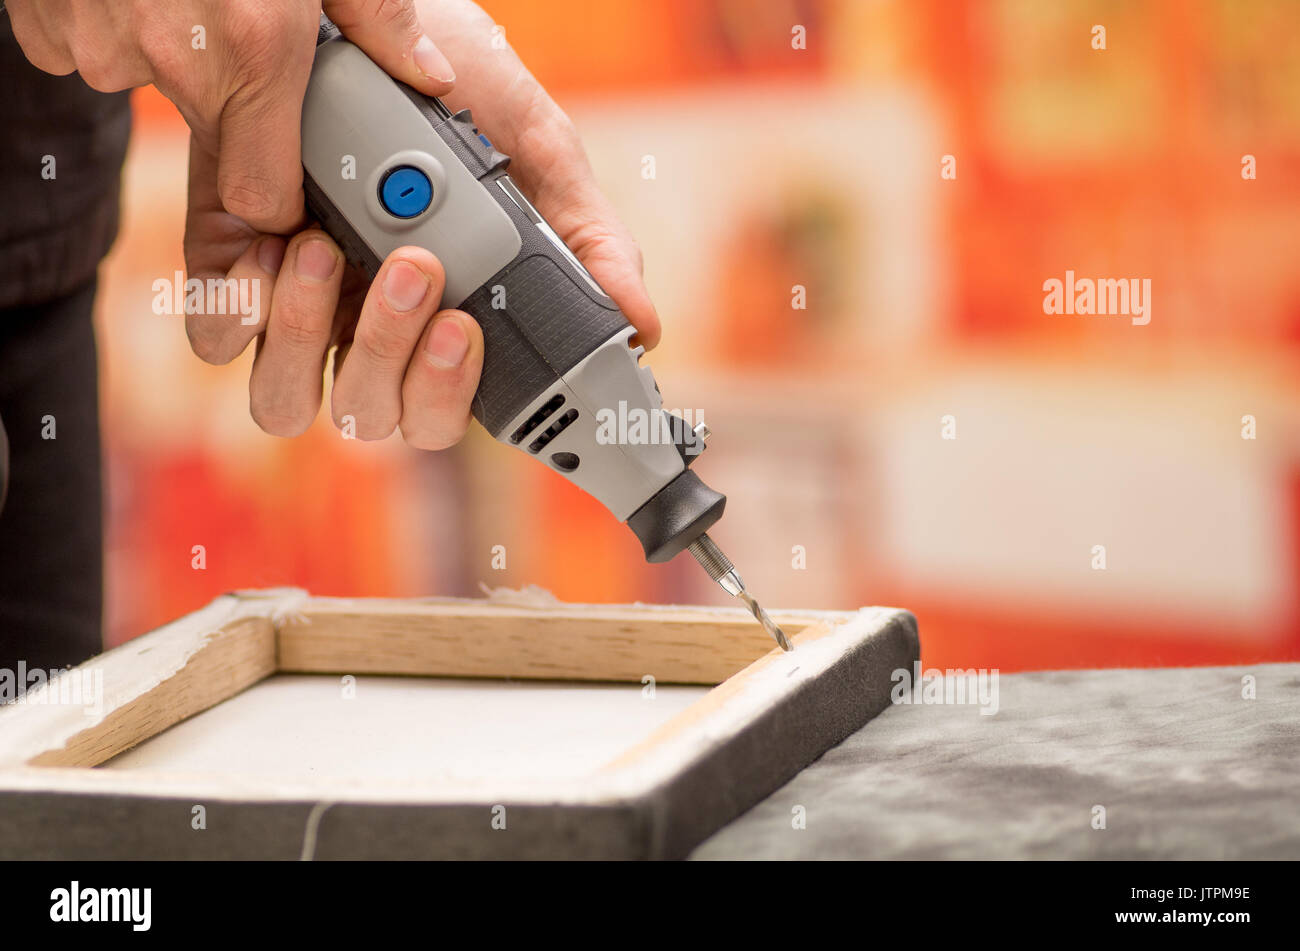 Closeup of a hardworker man drilling a wooden frame with his drill over a gray table in a blurred background Stock Photo